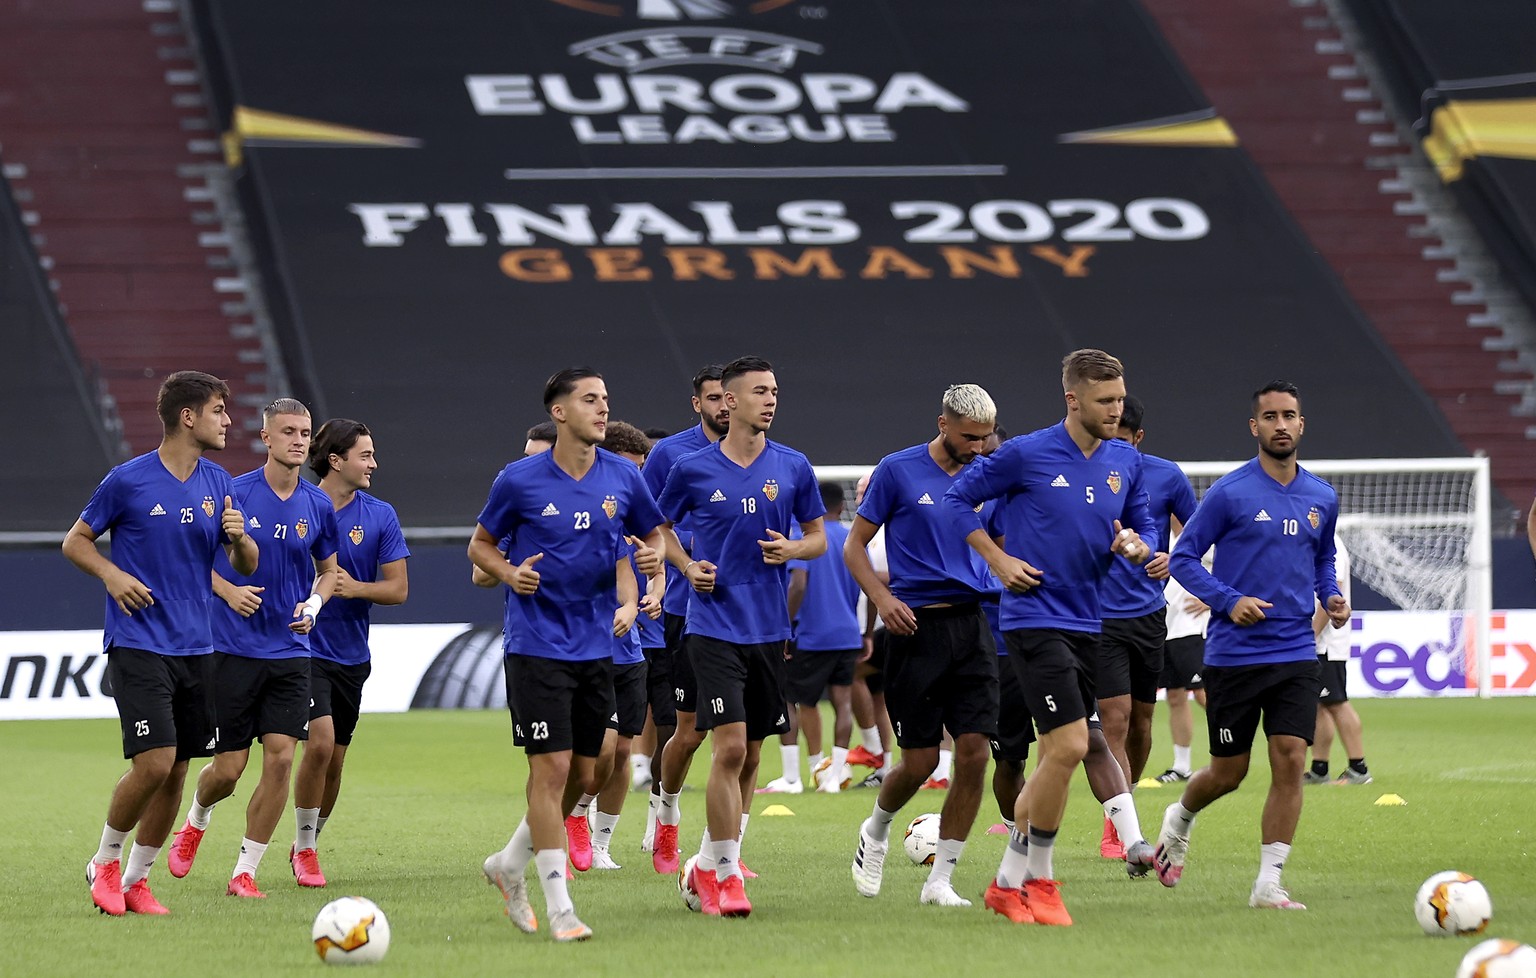 FC Basel&#039;s players jog during a training session in Gelsenkirchen, Germany, Monday, Aug. 10, 2020. FC Basel will play Shakhtar Donetsk in a Europa League quarterfinal soccer match on Tuesday. (La ...